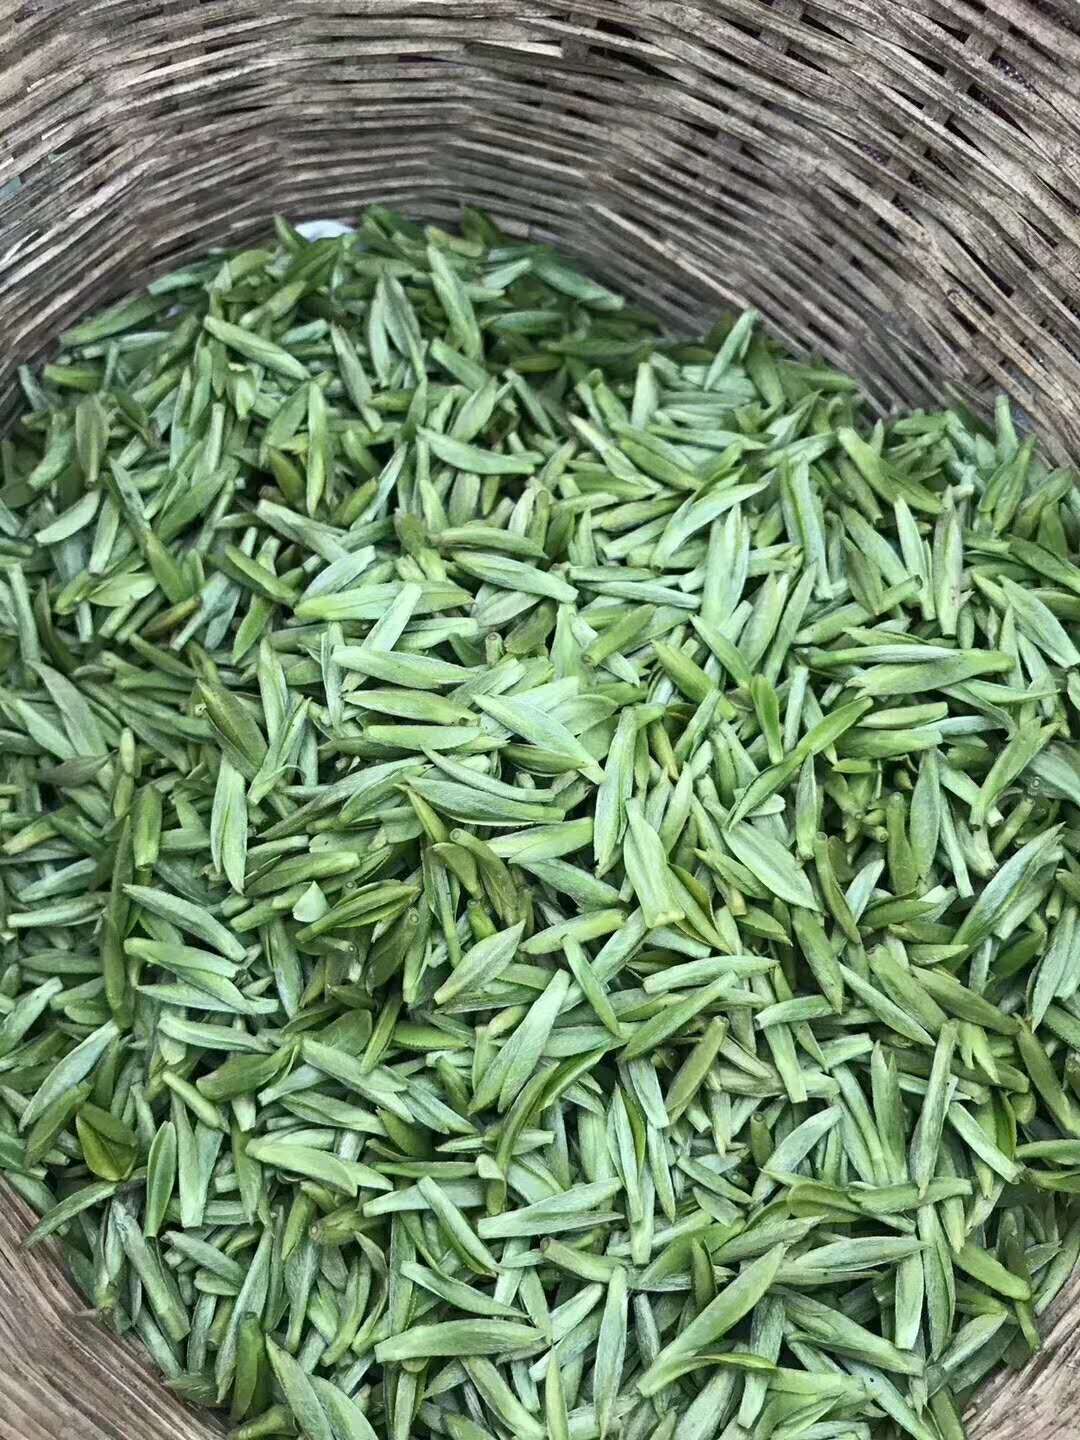 Lots of compact freshly plucked fuzzy tea buds in a woven basket. Soon to be processed into Mengding Ganlu (Sweet Dew) green tea. 2018.